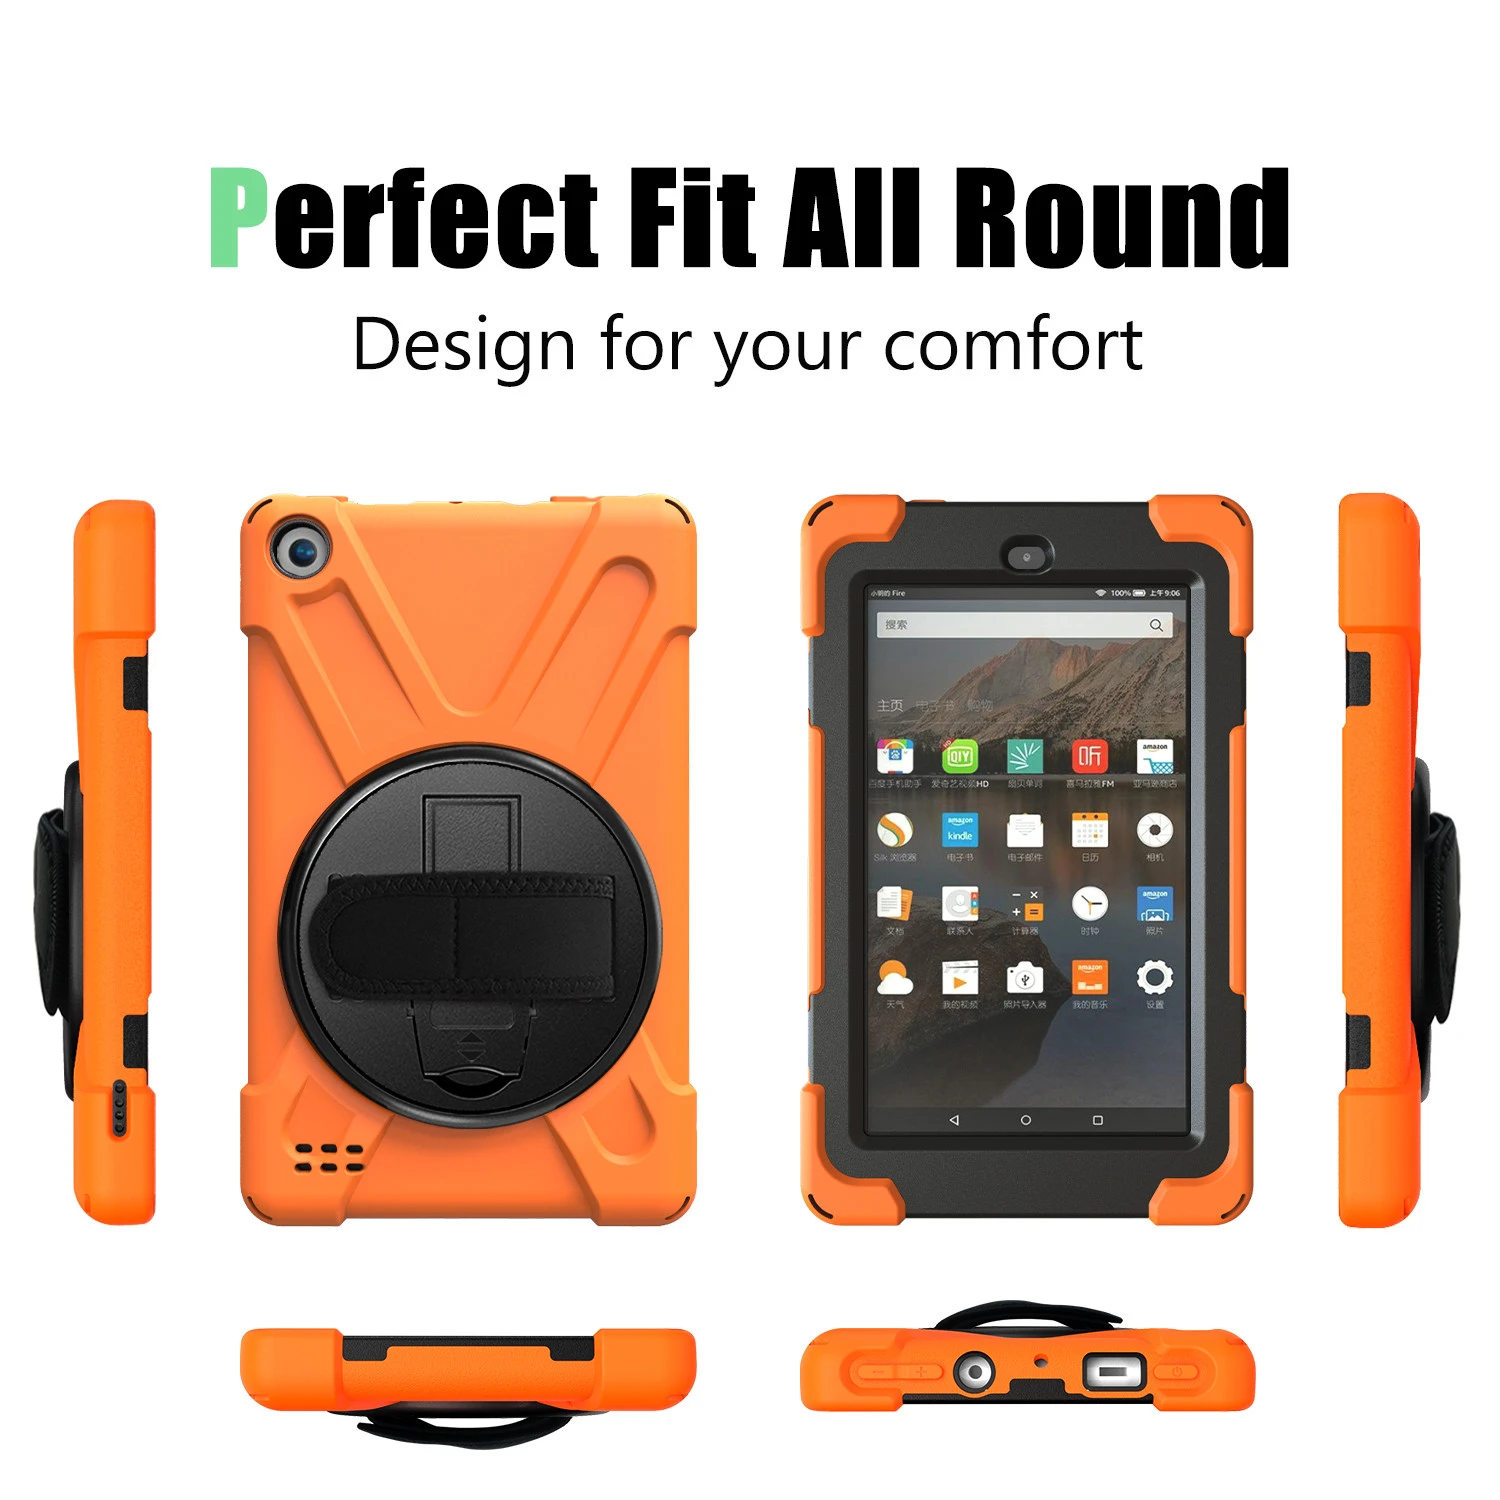 Silicon &amp; PC combo case For Amazon Kindle Fire 7 inchkids defender rugged tablet cover with shoulder strap and kickstand